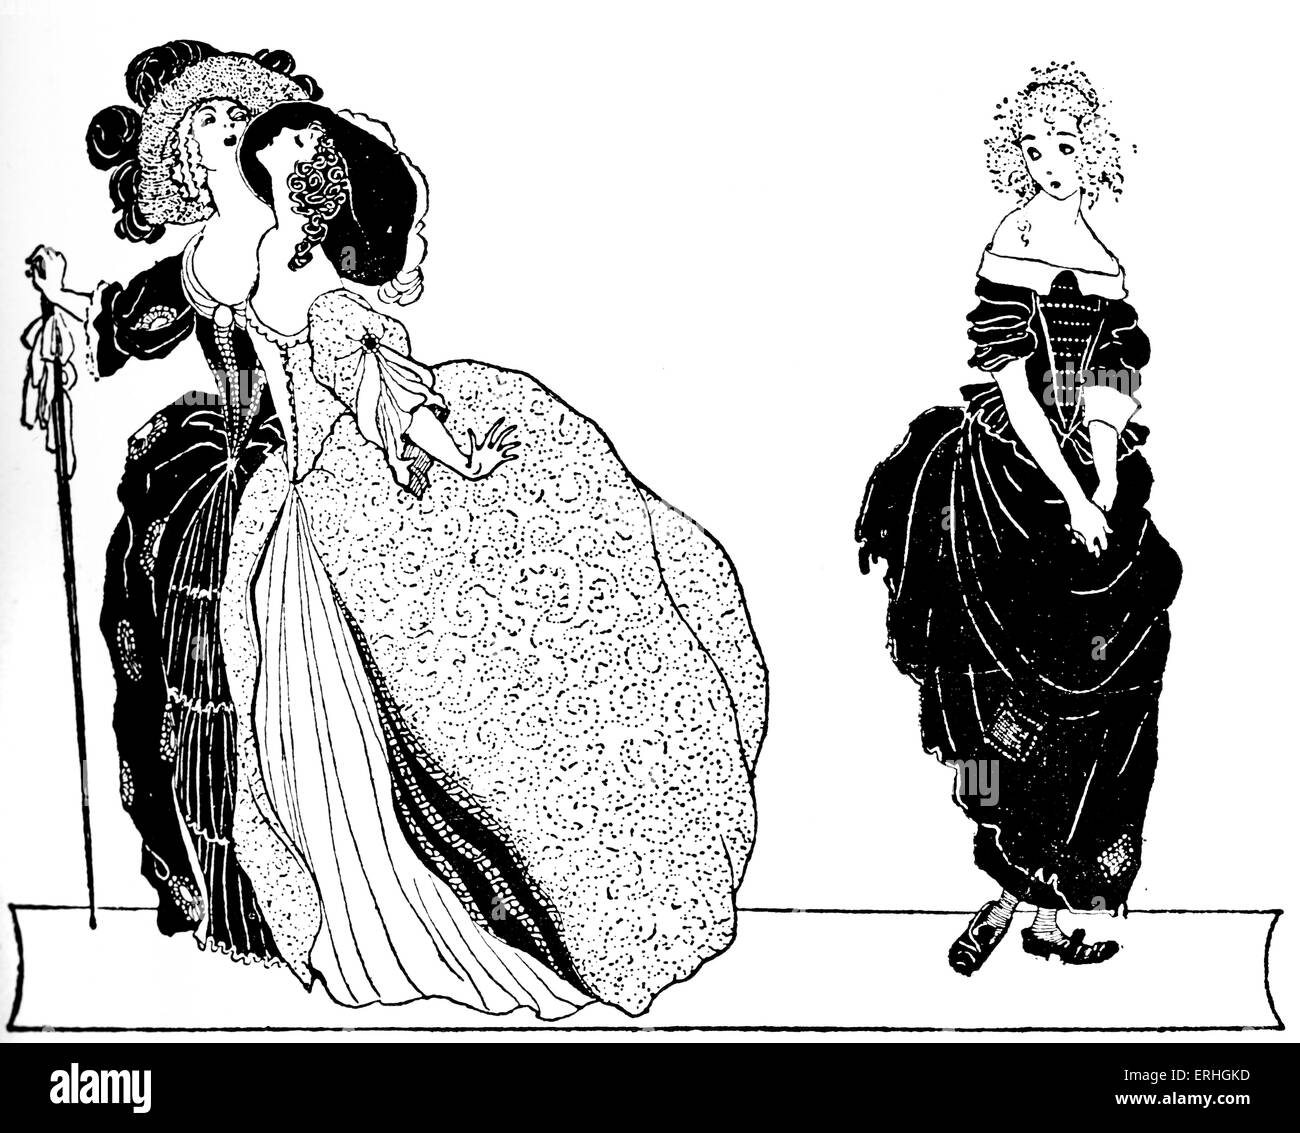 Cinderella - illustration from the fairy tale of Cinderella with her two ugly sisters.Taken from Cinderella and Her Stepsisters Stock Photo